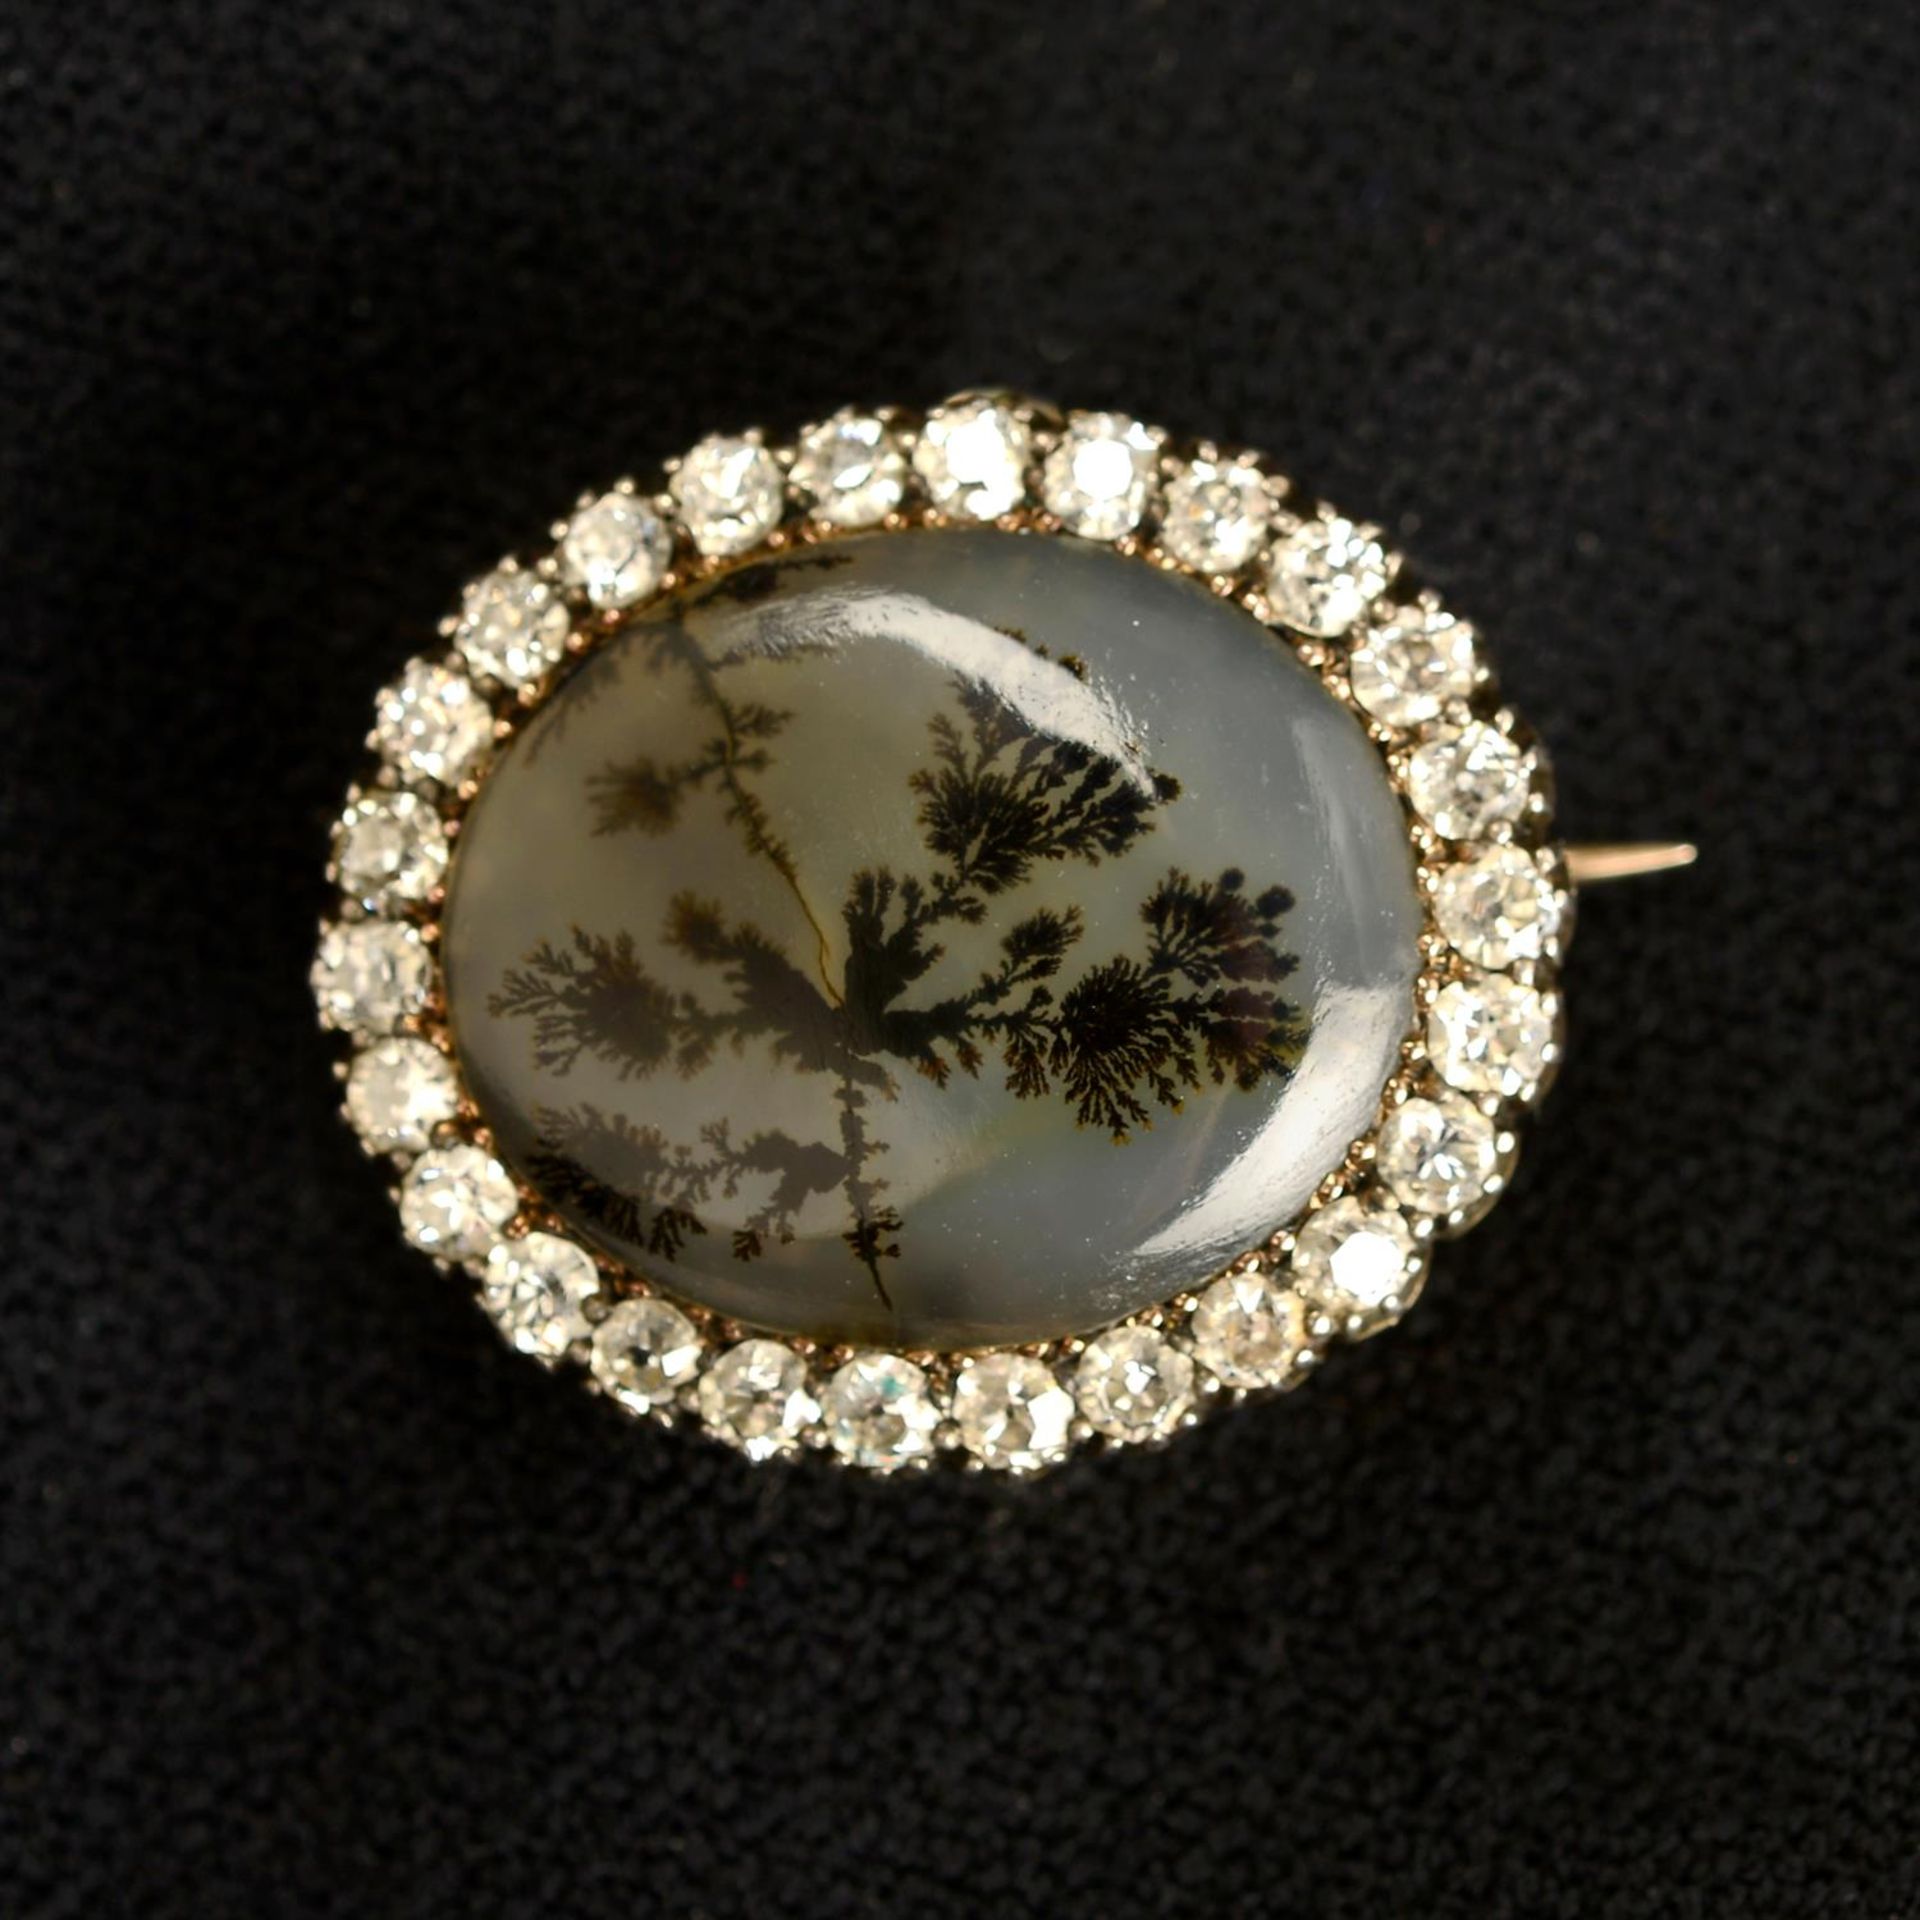 A 19th century silver and gold moss agate brooch, with old-cut diamond surround.